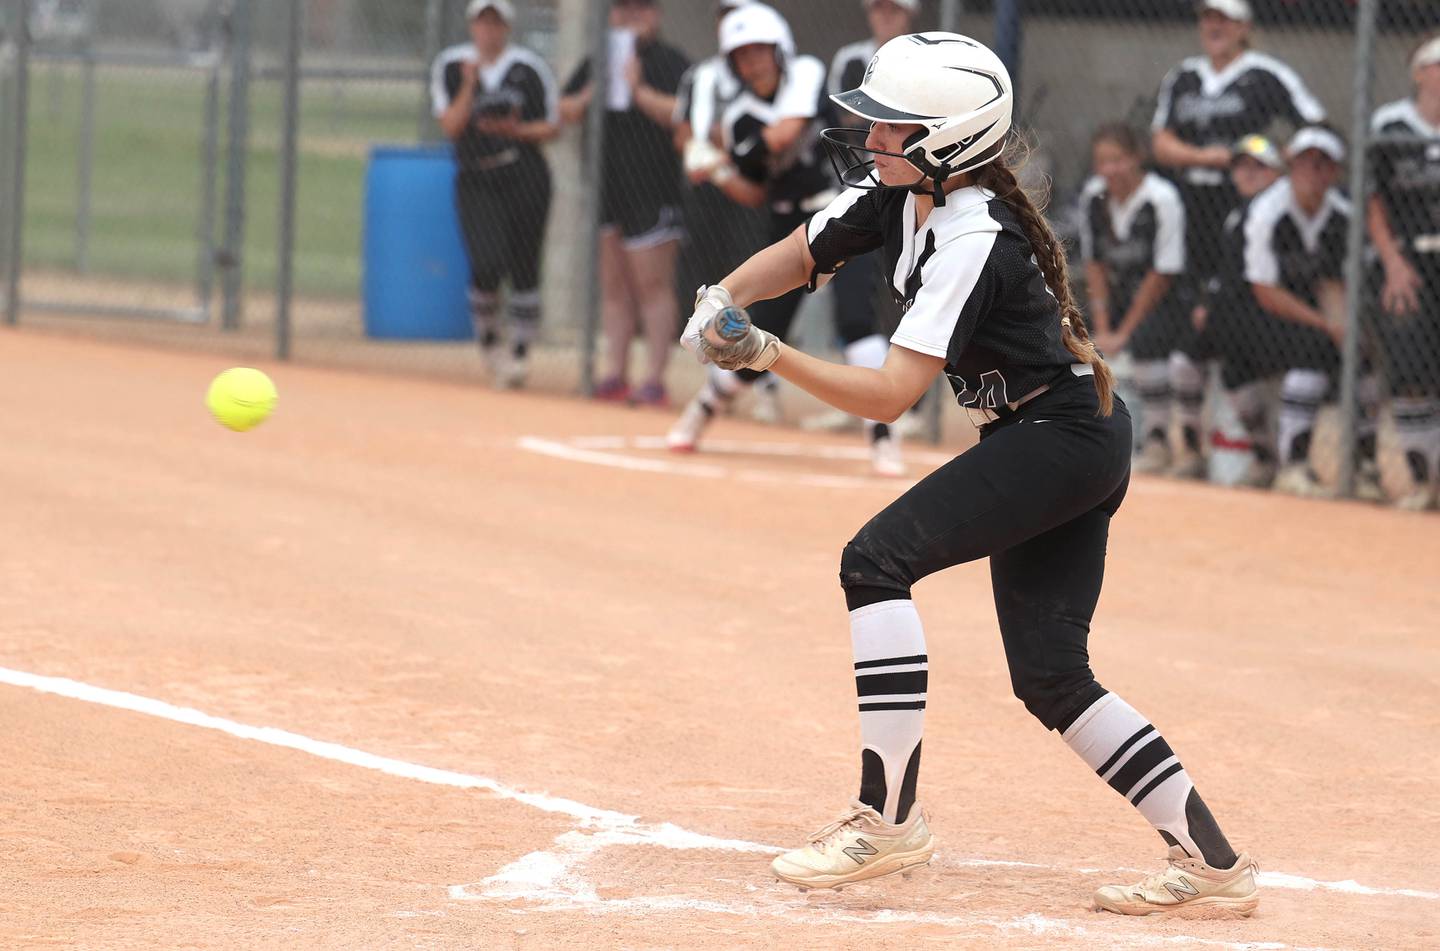 Kaneland's MacKenzie Hardy tries to get a bunt down during their Class 3A sectional matchup against Sycamore Wednesday, May 31, 2023, at Belvidere North High School. The game was postponed due to weather after a half inning.